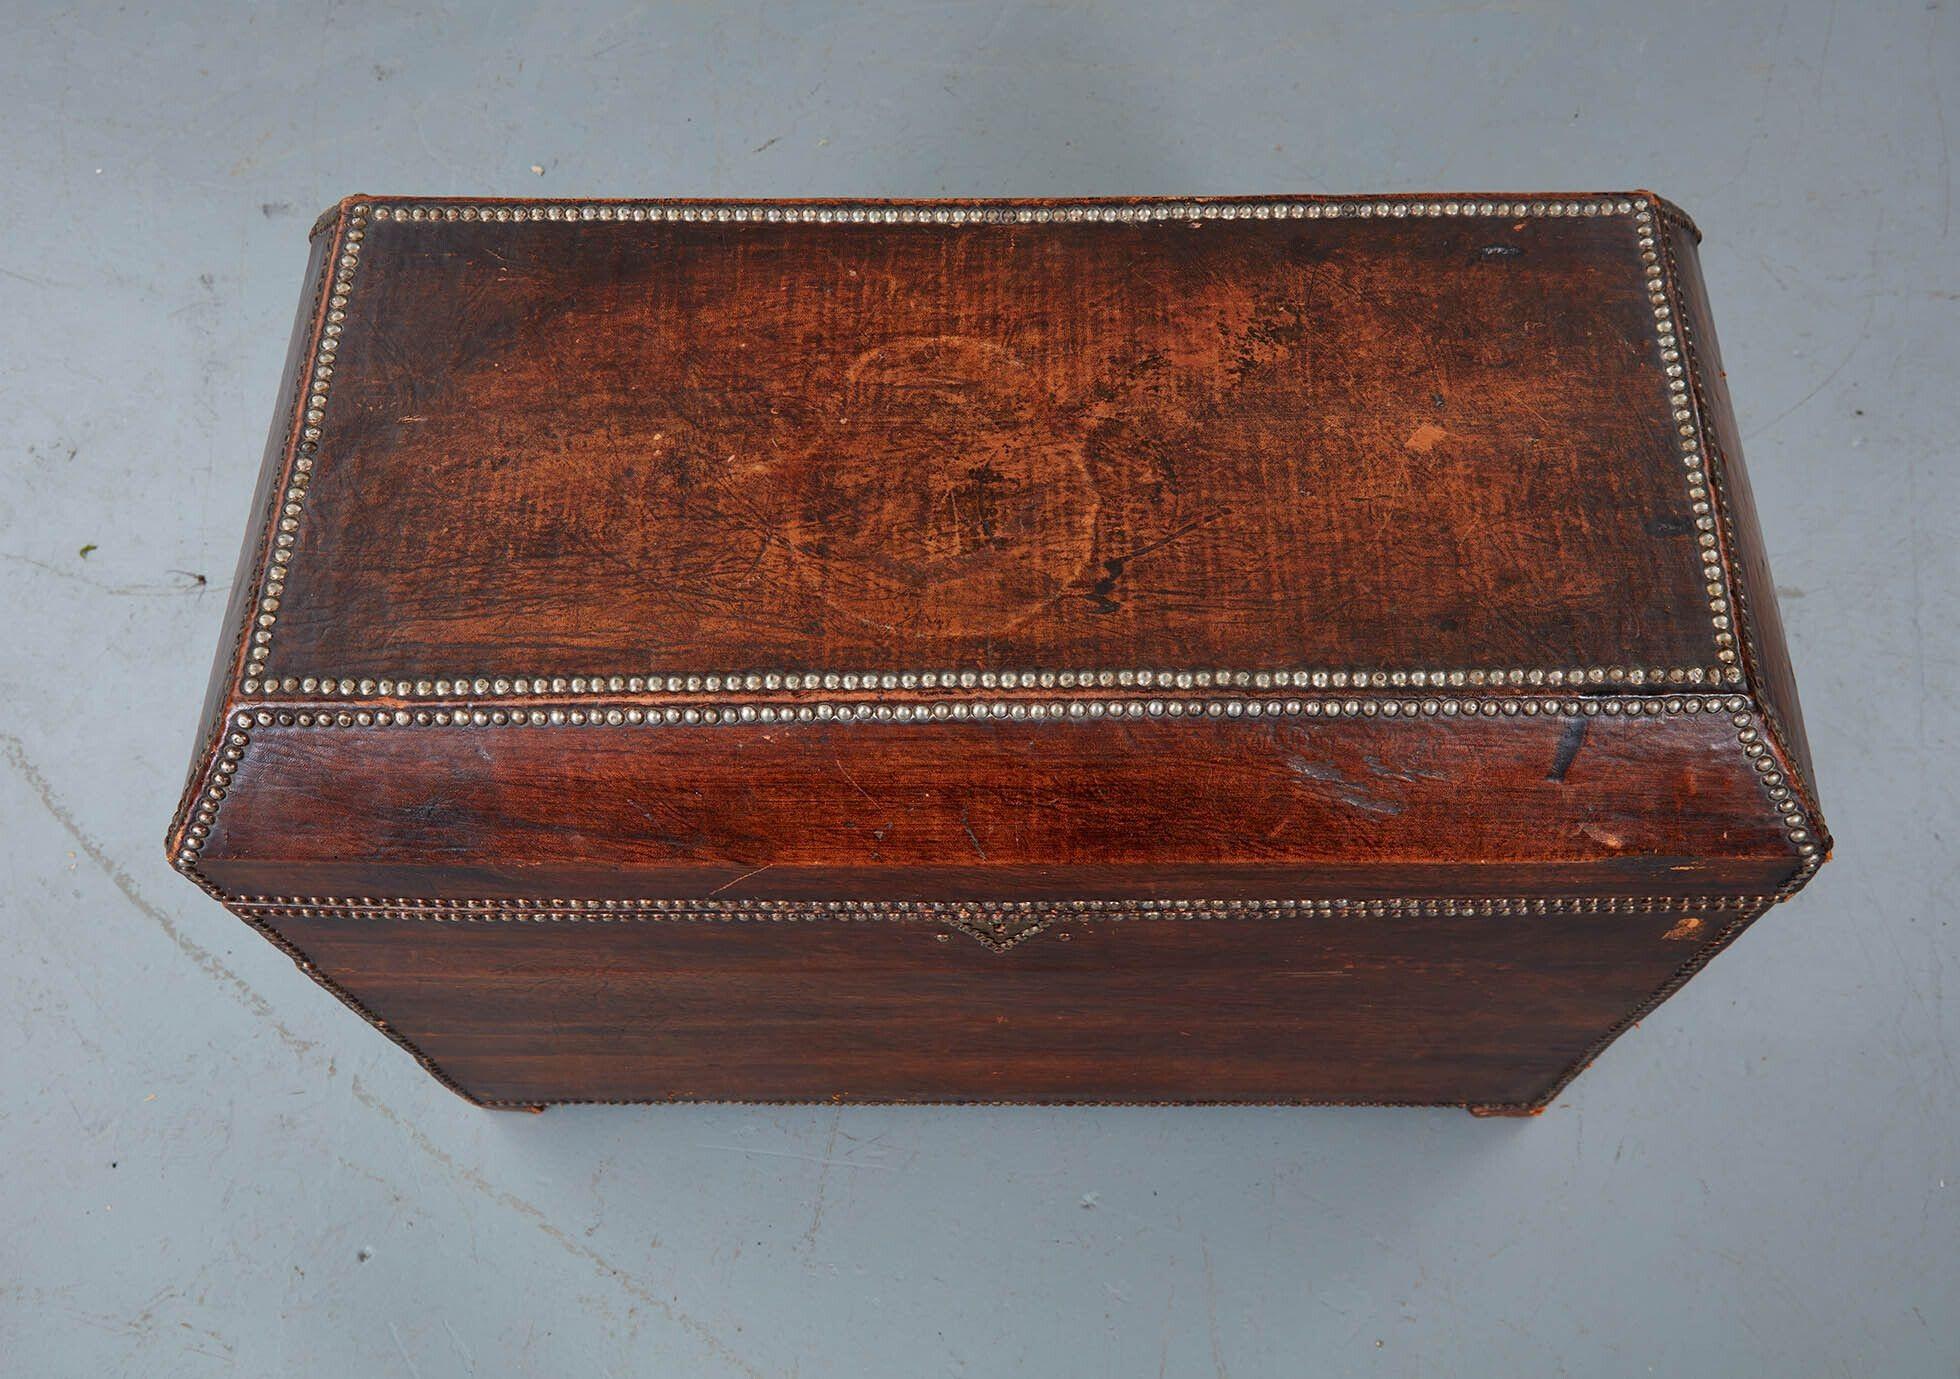 An Arts & Crafts leather covered and copper studded trunk with good patina to leather, beveled top and hand-forged wrought iron handles with star escutcheons and chased iron rings. Desirable flat top for use as a coffee table.